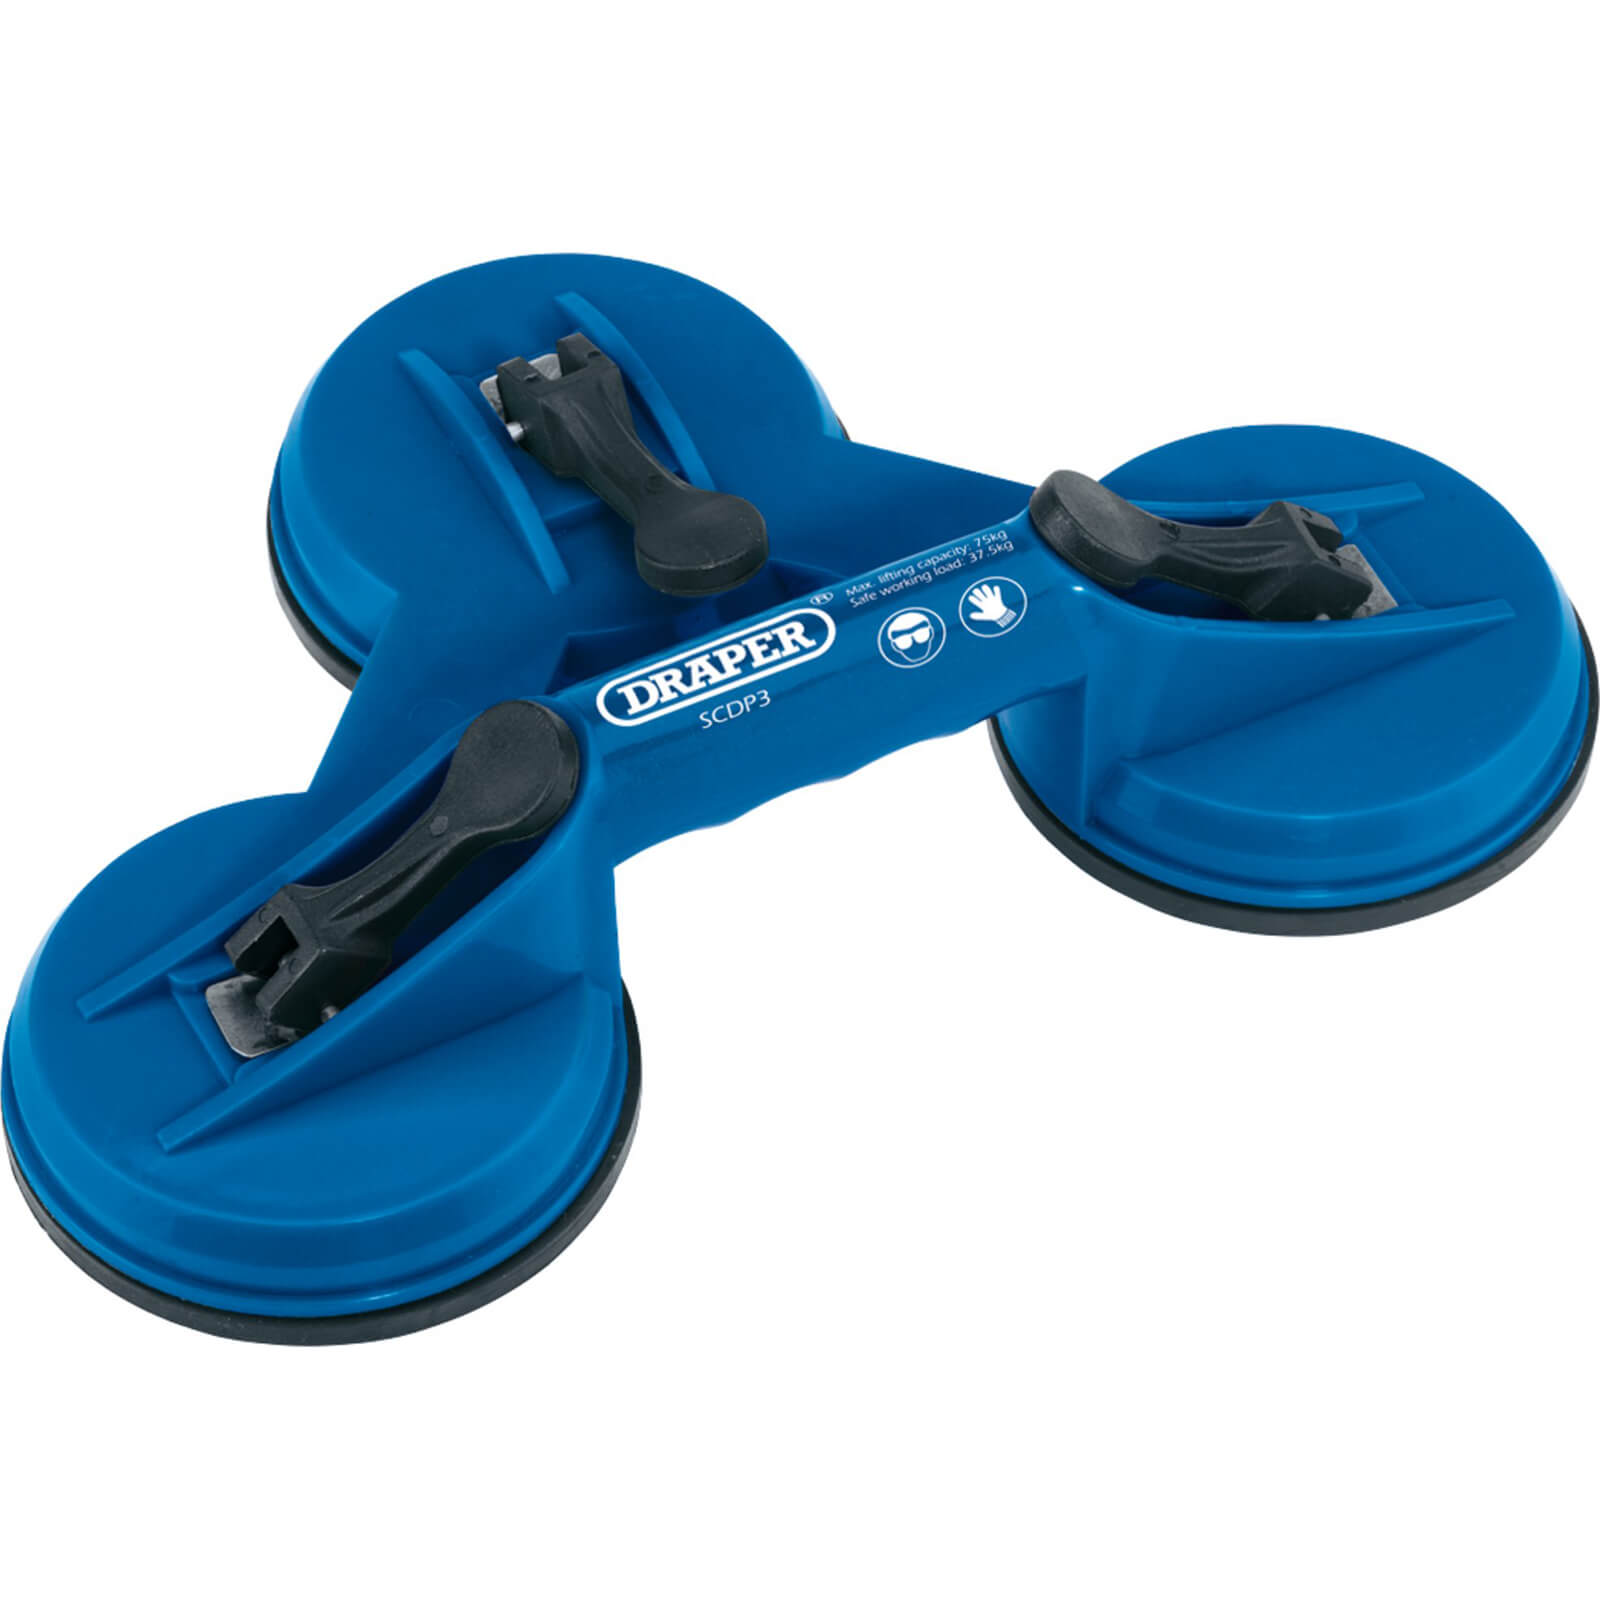 Image of Draper Suction Cup Lifter Triple